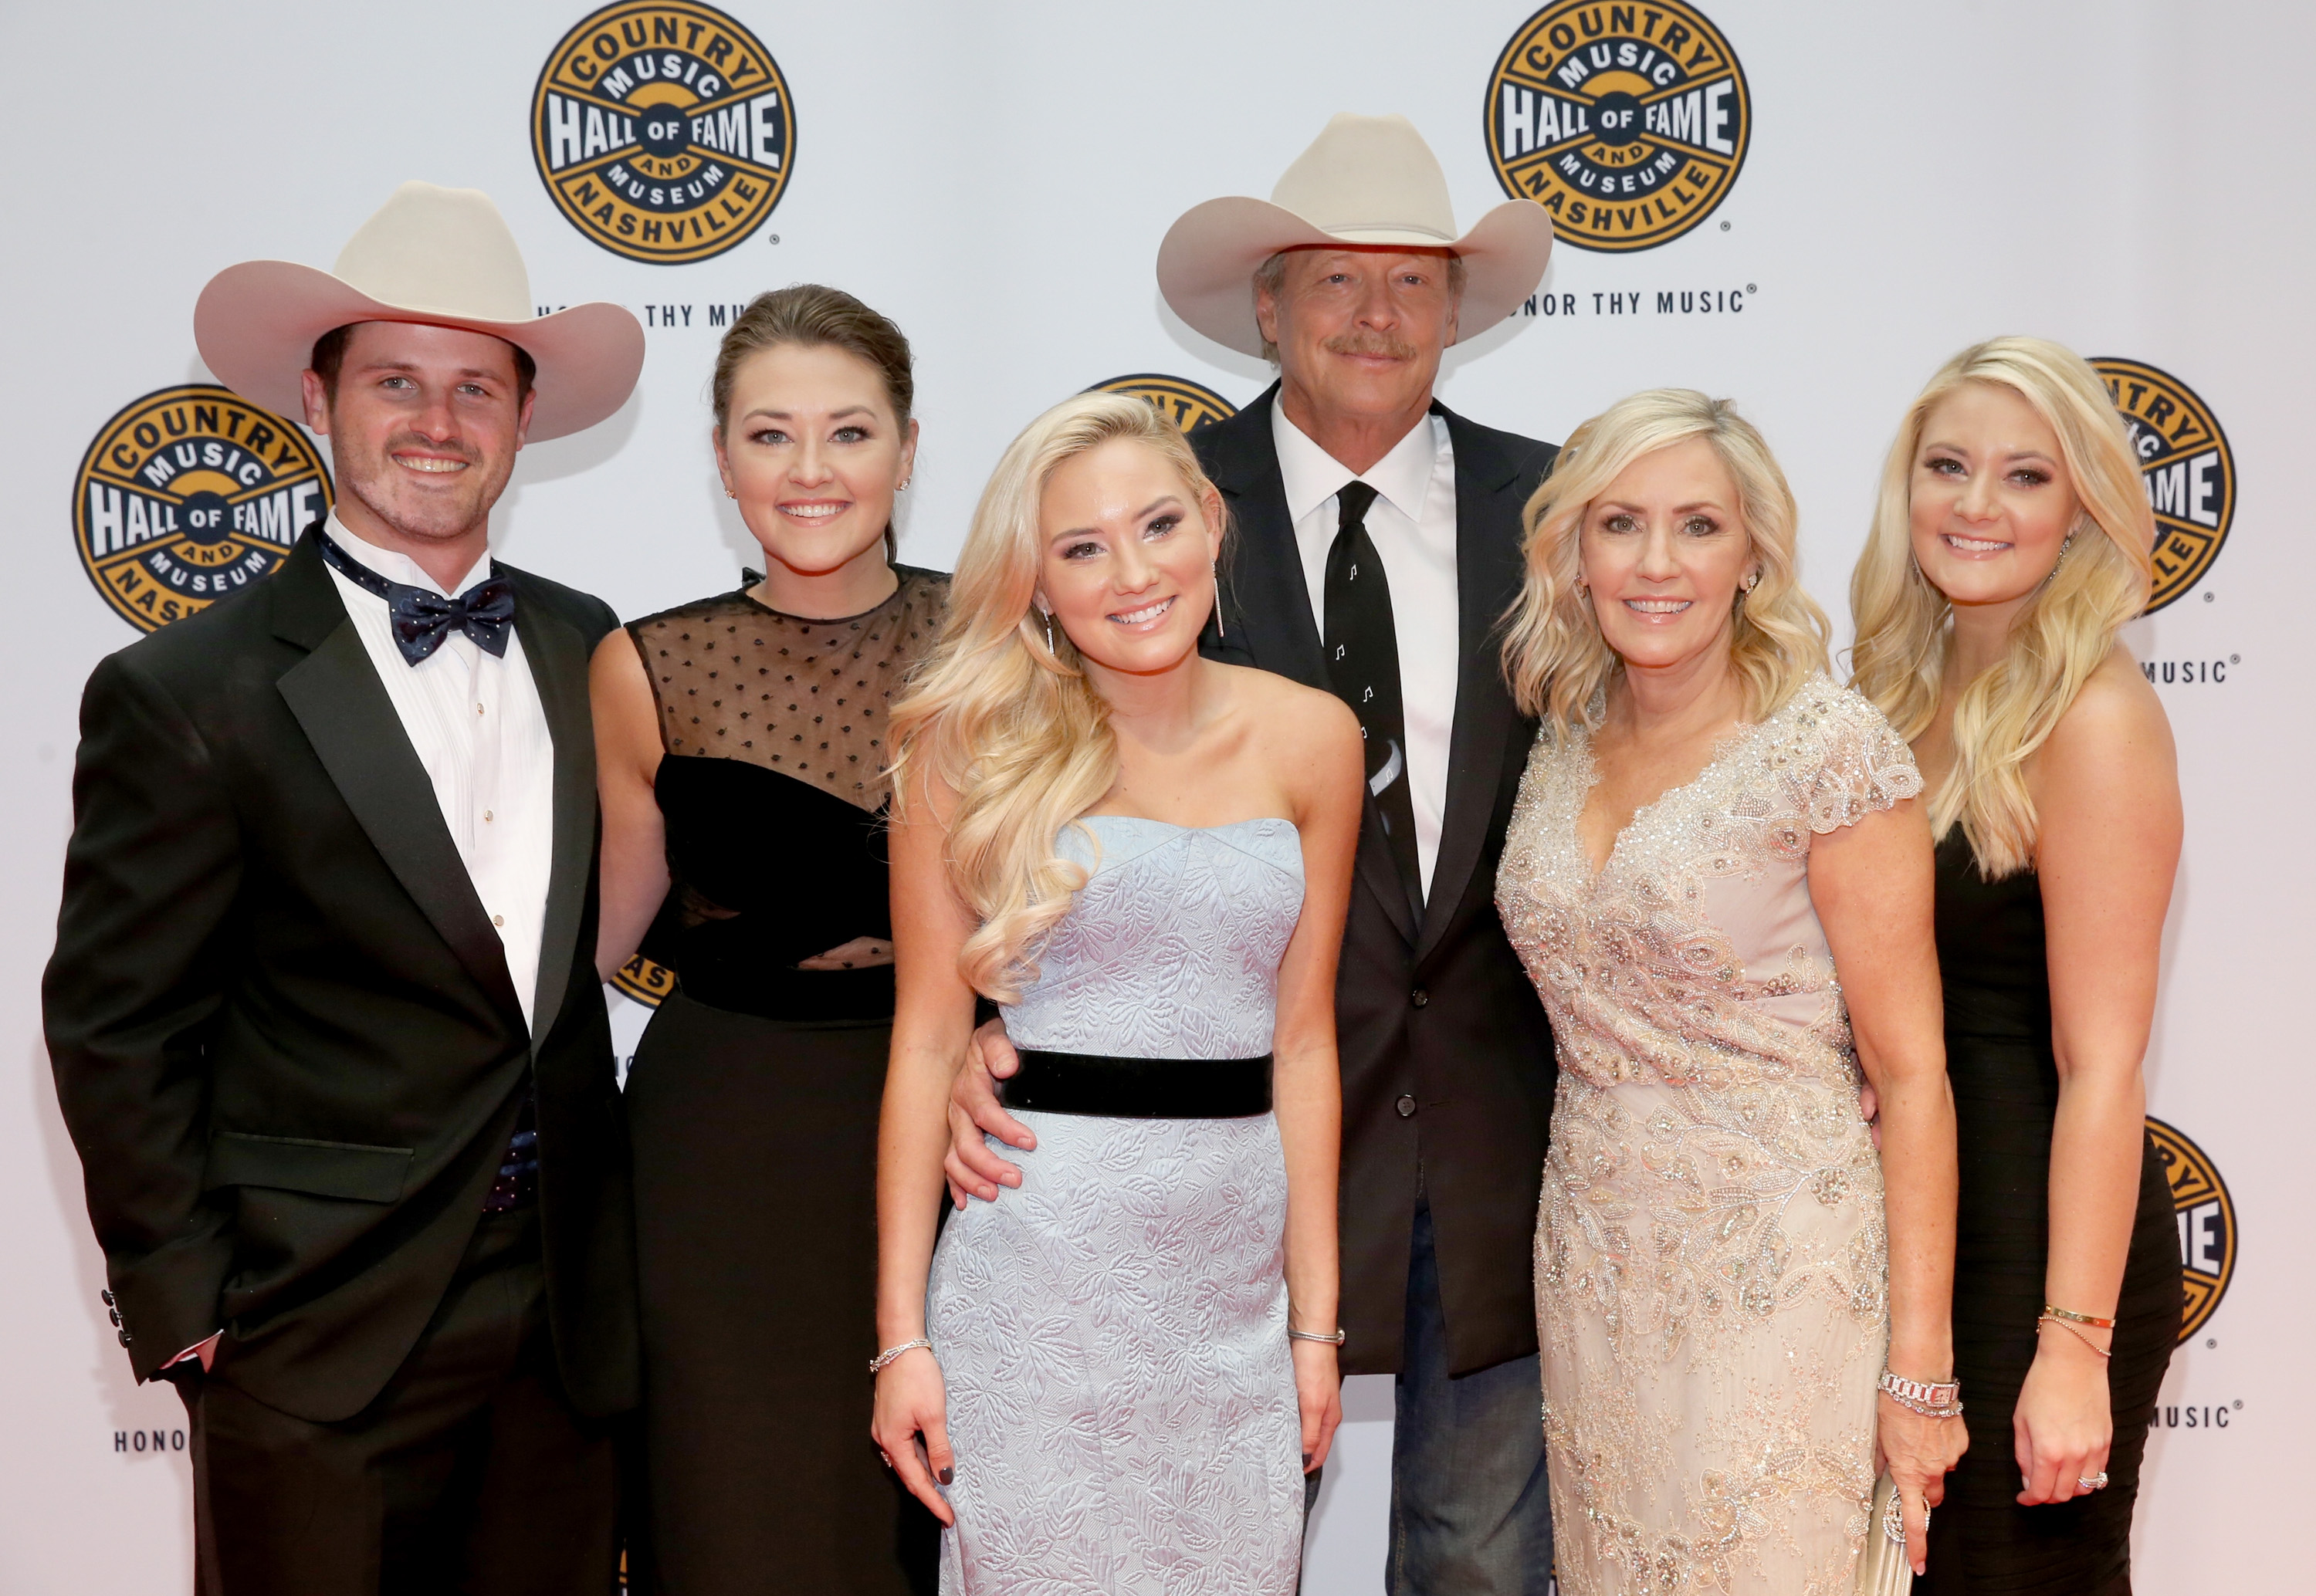 Ben Selecman, Mattie Jackson Selecman, Dani Grace, Alan, Denise, and Alexandra Jane "Ali" Jackson at the Country Music Hall of Fame and Museum Medallion Ceremony on October 22, 2017, in Nashville | Source: Getty Images